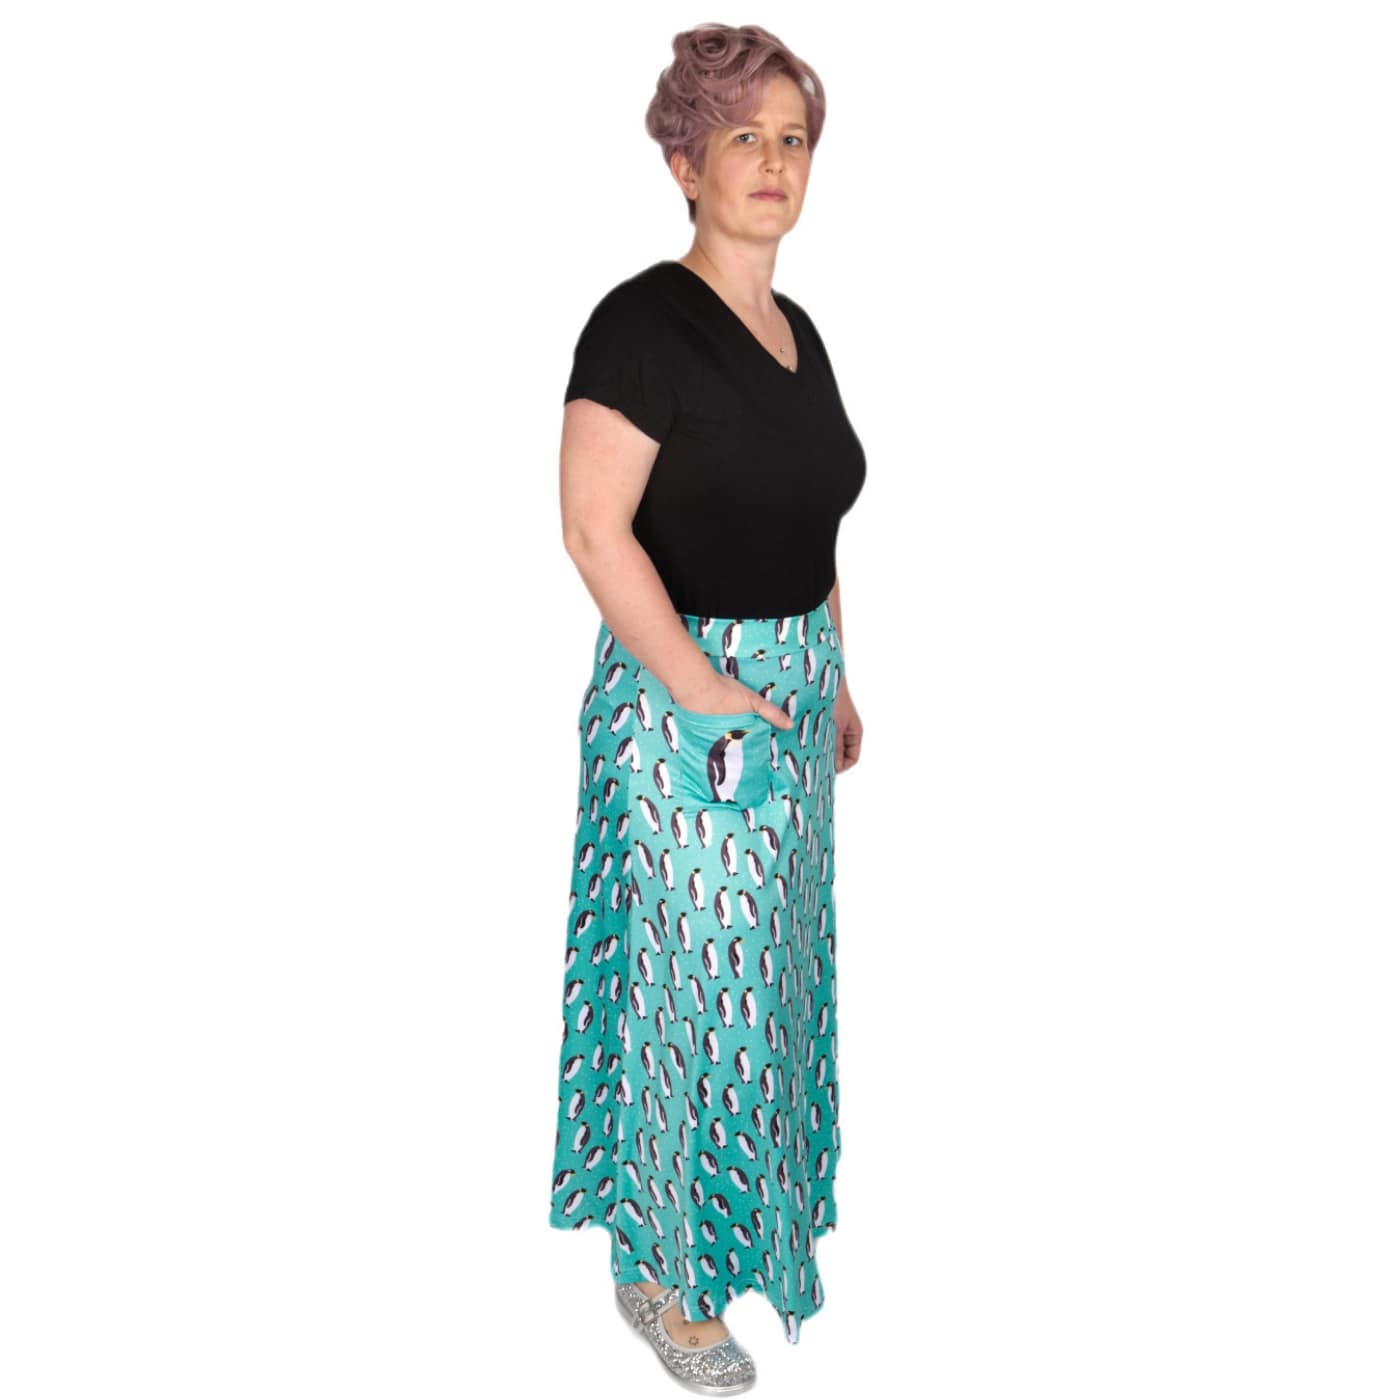 Waddle Maxi Skirt by RainbowsAndFairies.com.au (Emperor Penguin - Penguins - Animal Print - Long Skirt - Vintage Inspired - Boho - Skirt With Pockets) - SKU: CL_MAXIS_WADDL_ORG - Pic-08